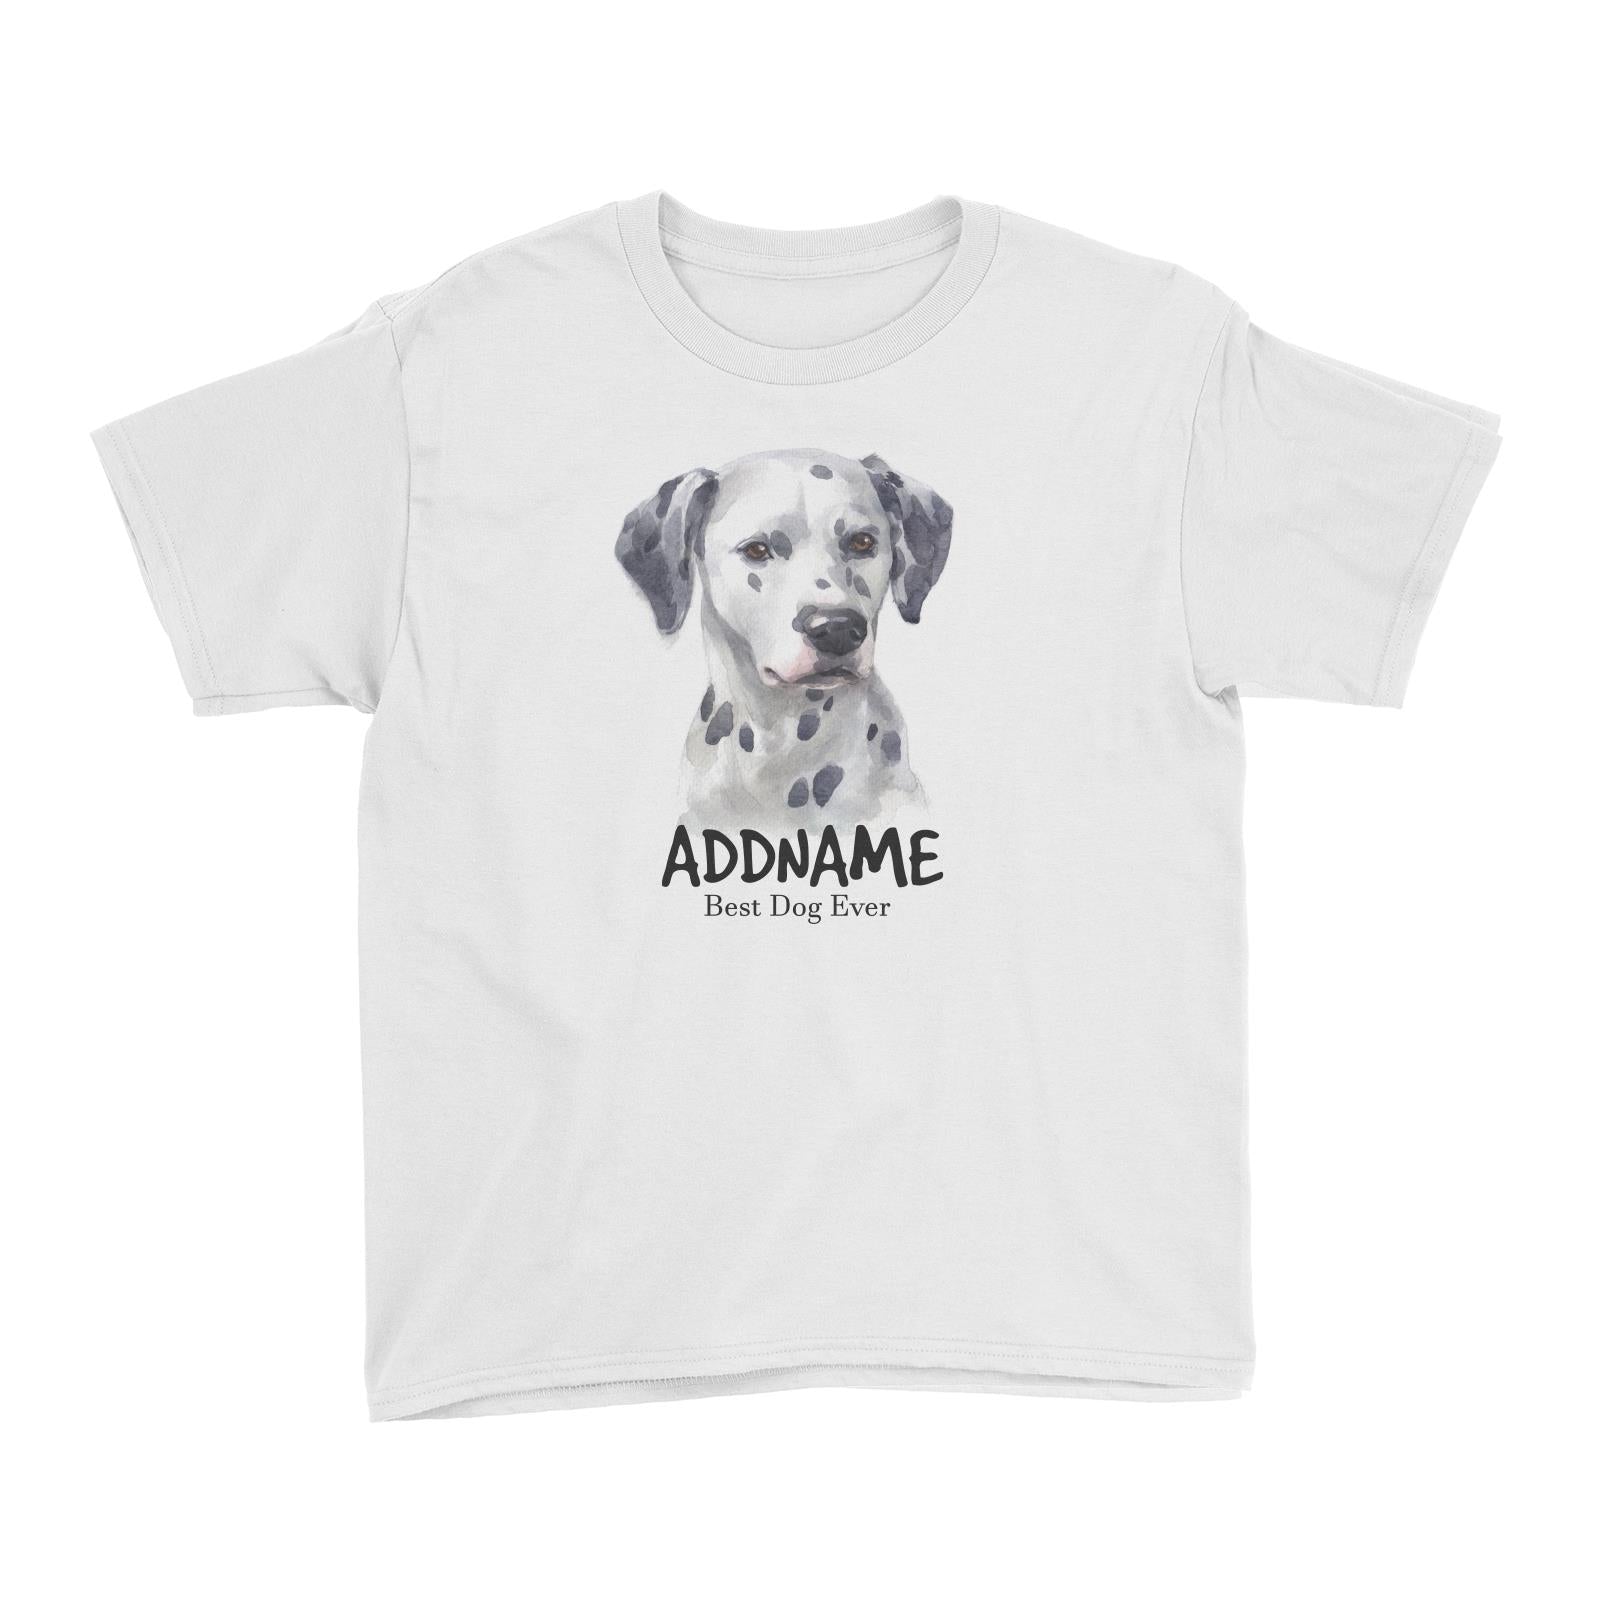 Watercolor Dog Dalmatian Best Dog Ever Addname Kid's T-Shirt